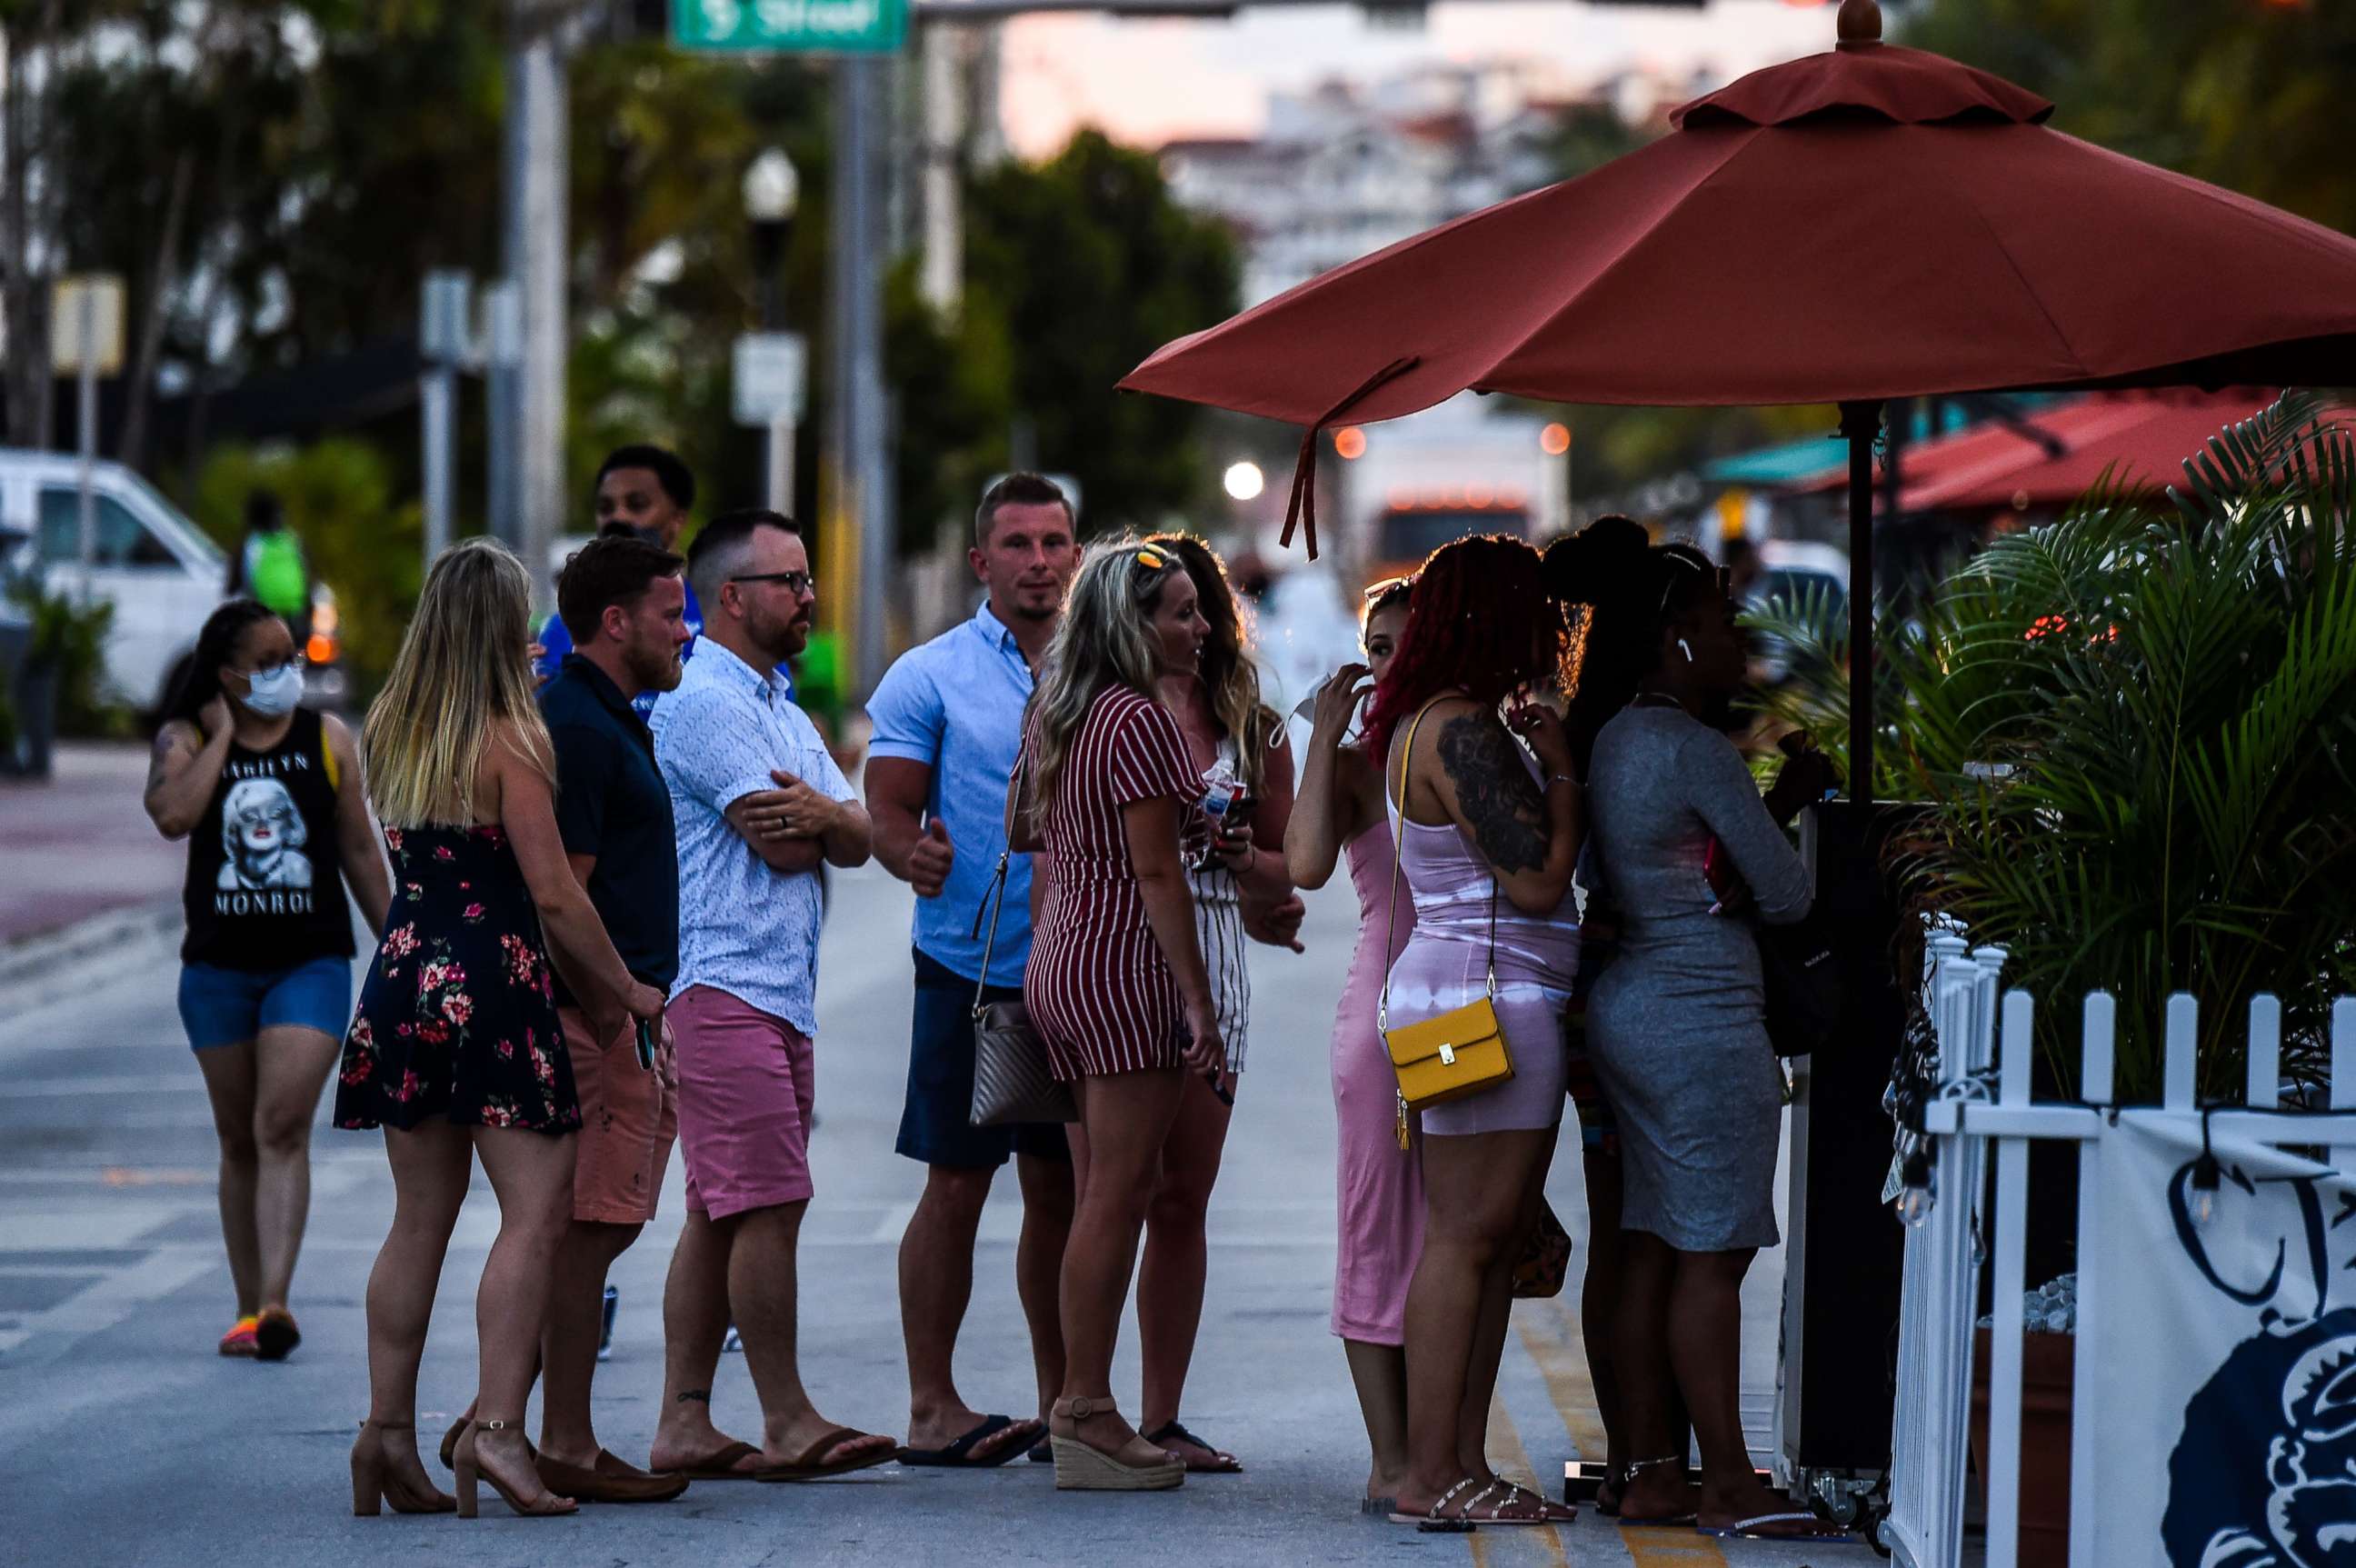 PHOTO: People stand in line to enter a restaurant on Ocean Drive in Miami Beach, Fla., June 26, 2020.